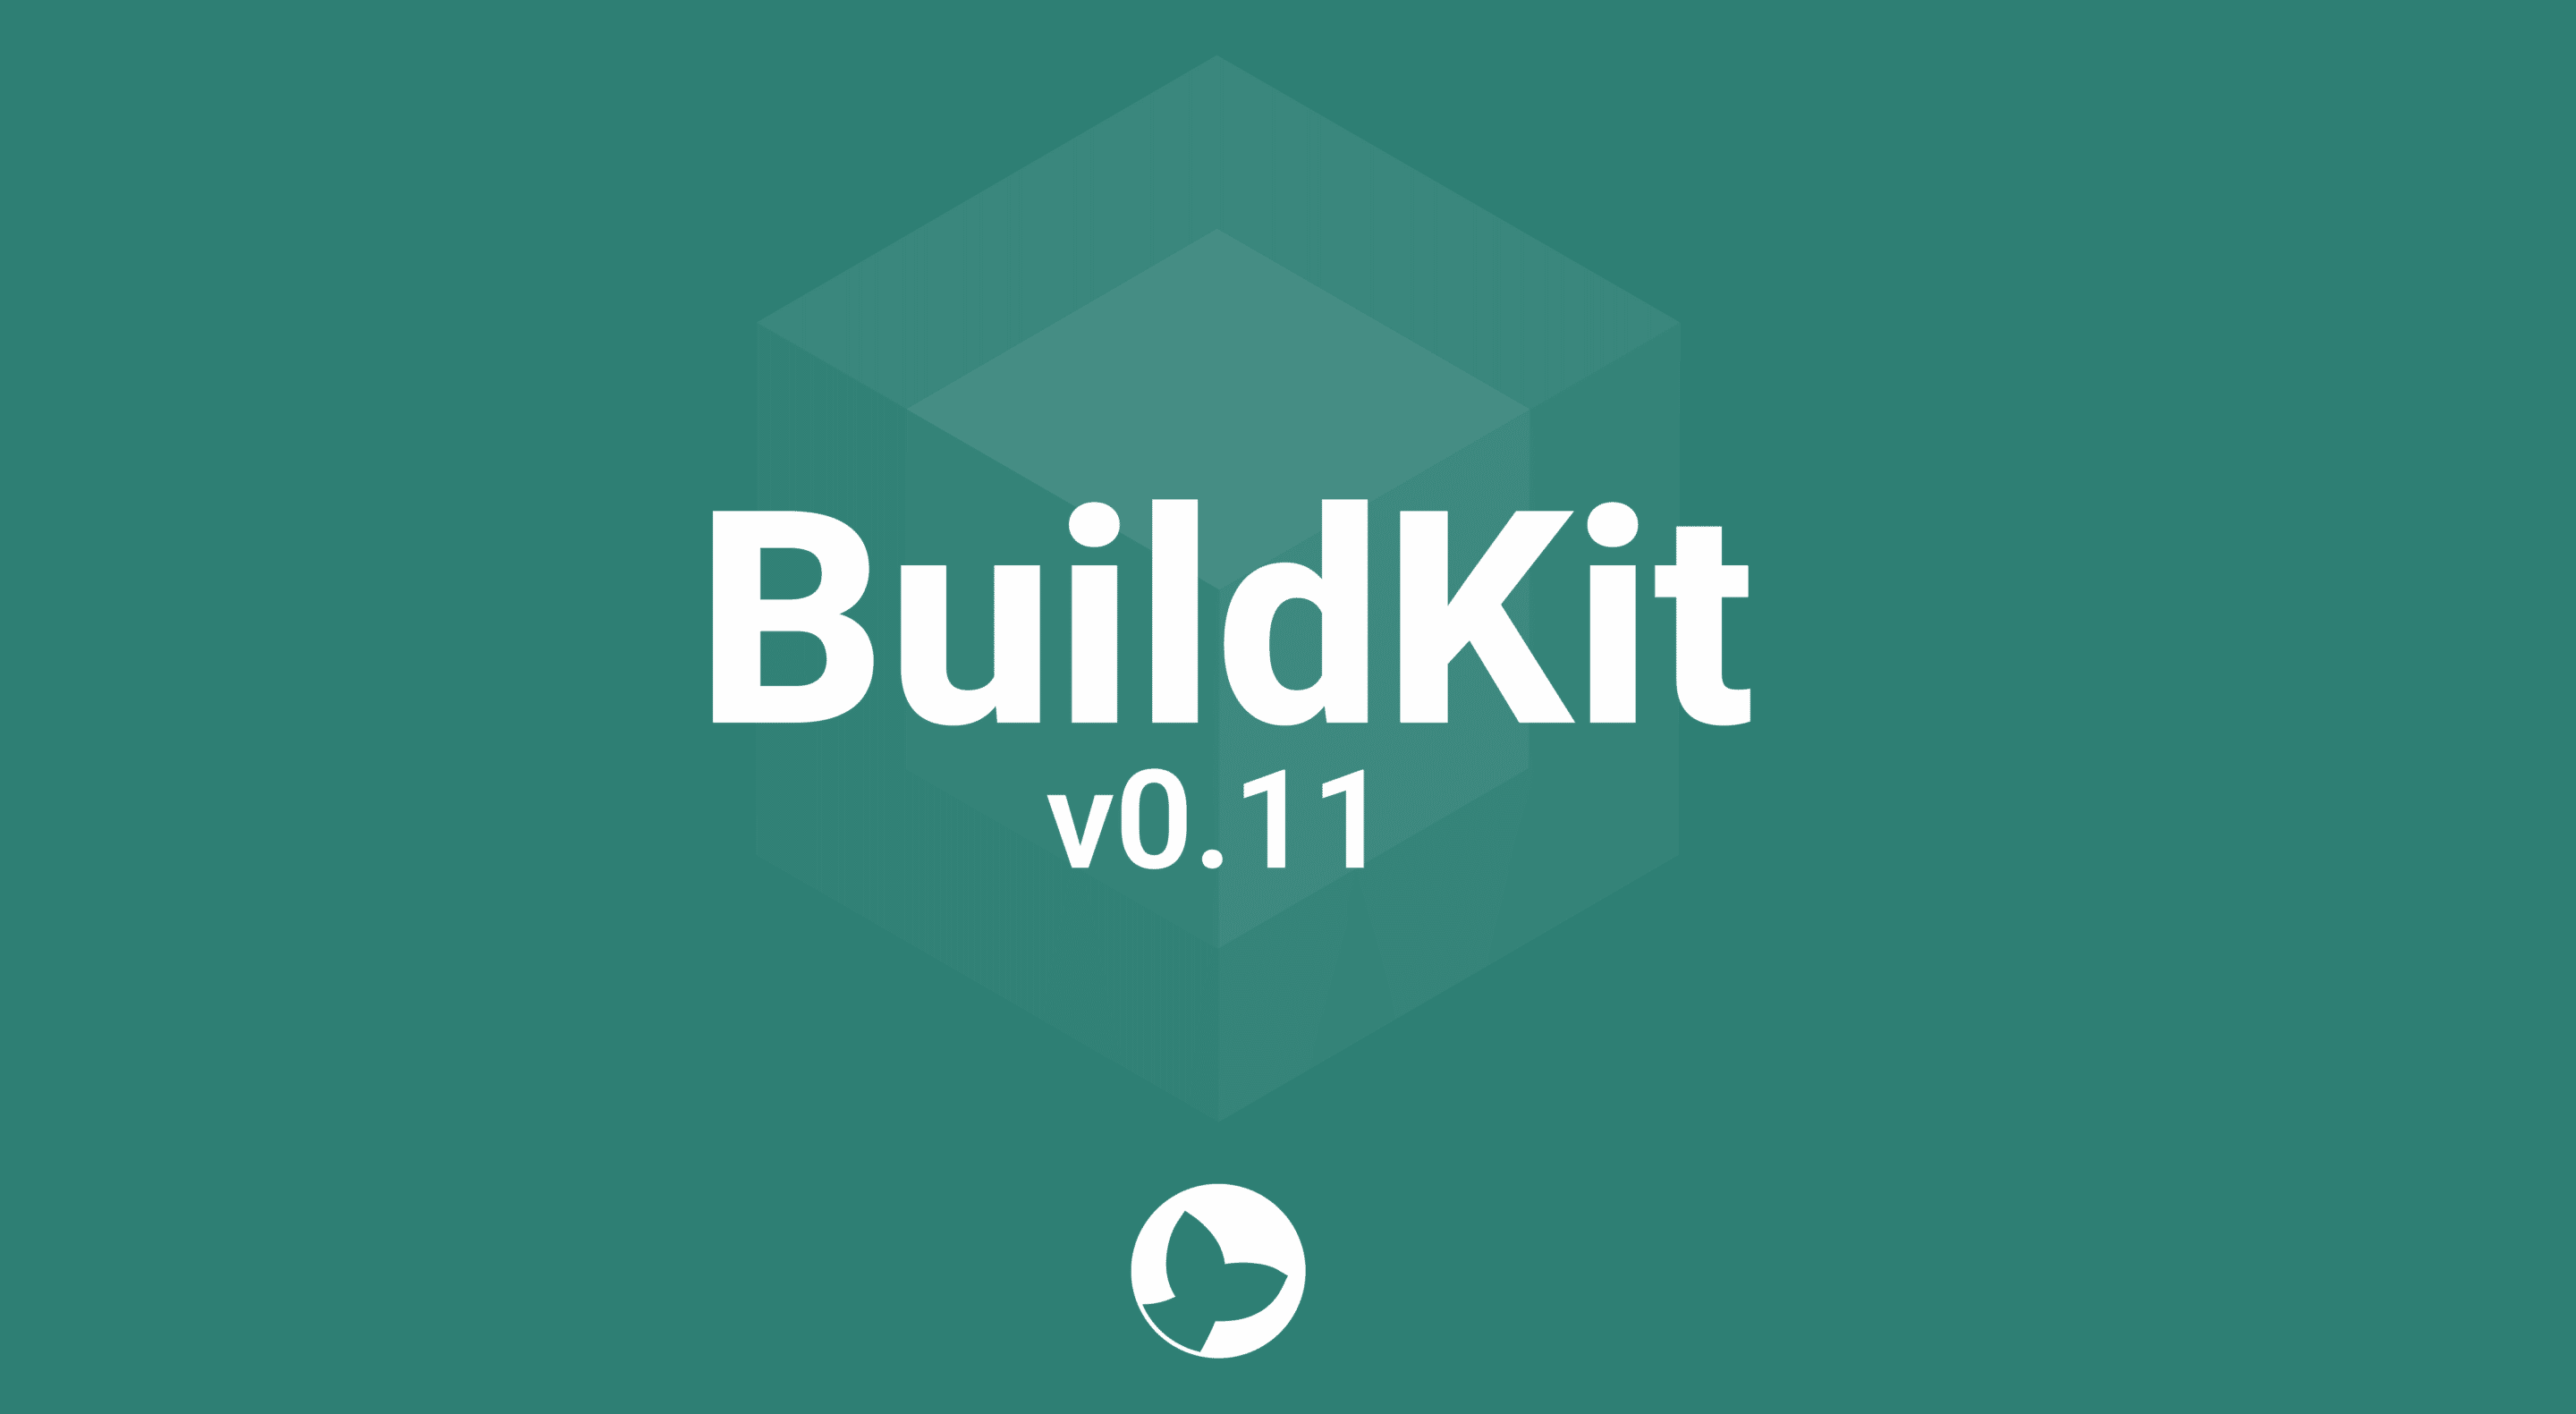 BuildKit v0.11 now available.